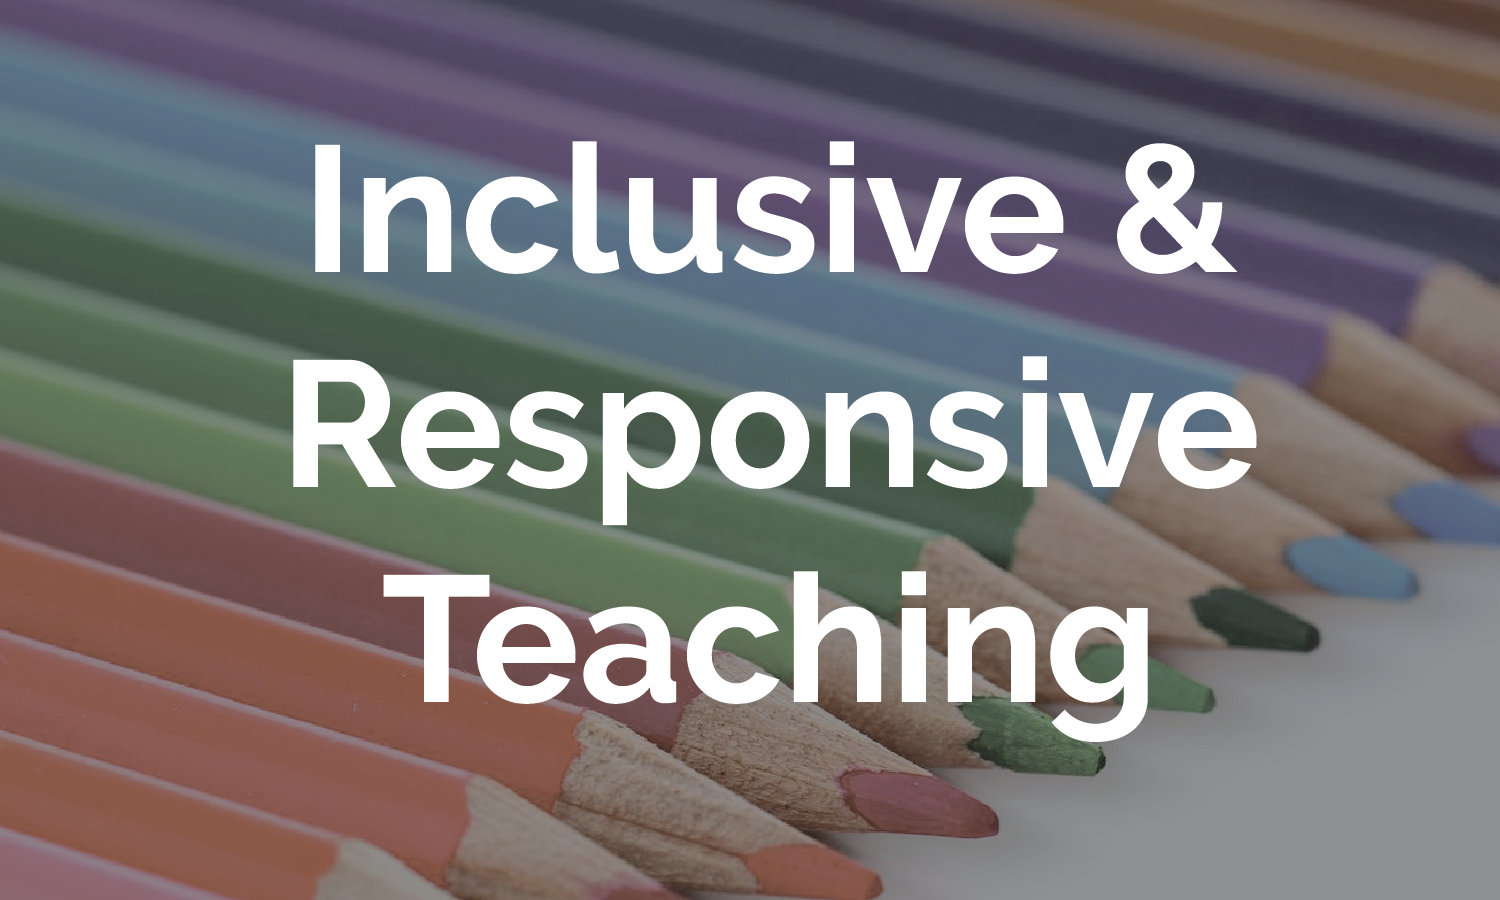 Access the Inclusive & Responsive Teaching online module. 